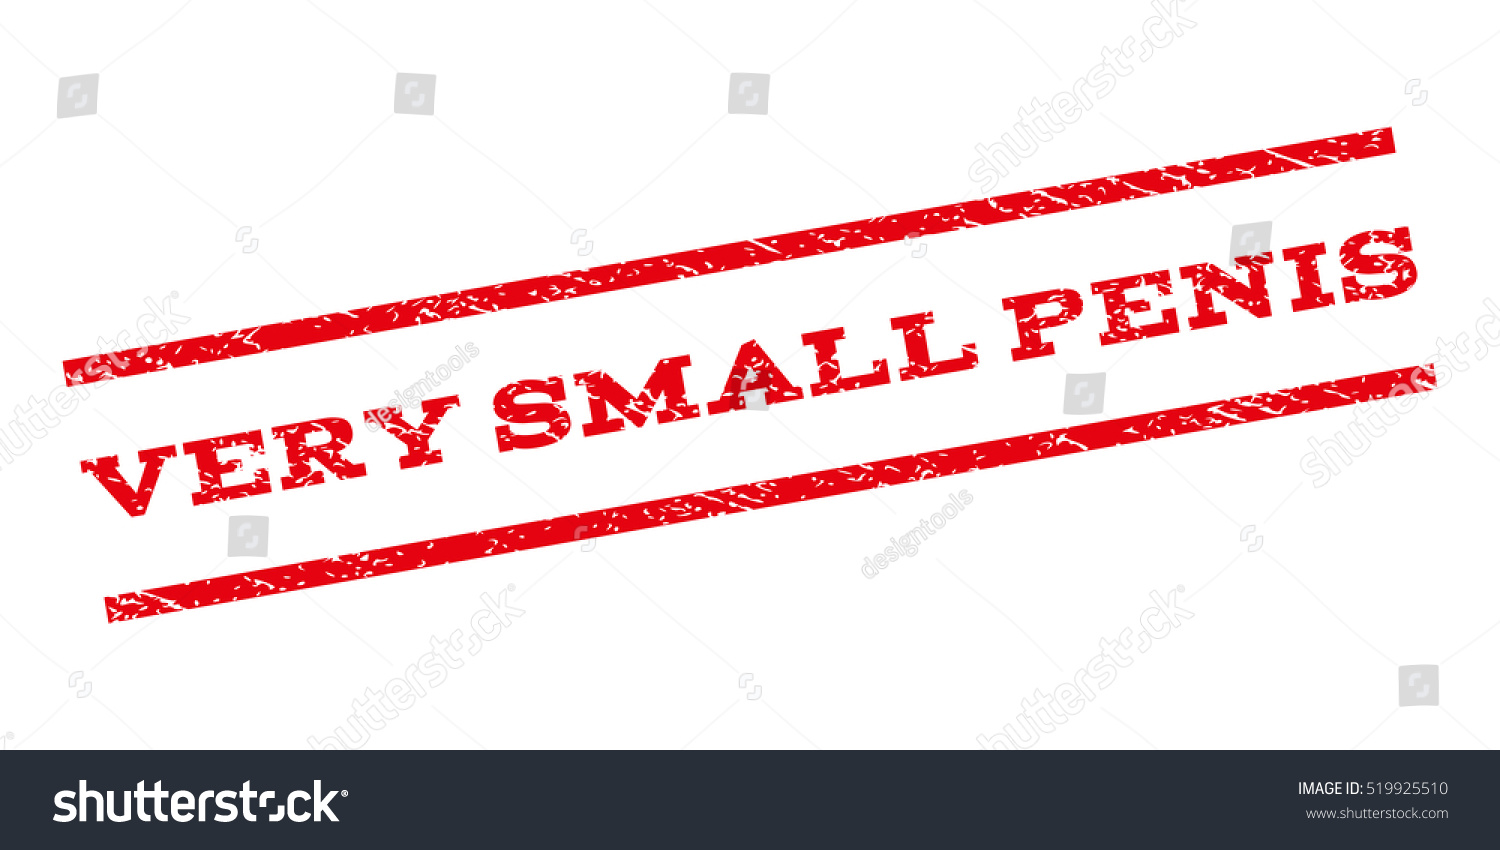 Very Small Penis Watermark Stamp Text Stock Vector Royalty Free 519925510 